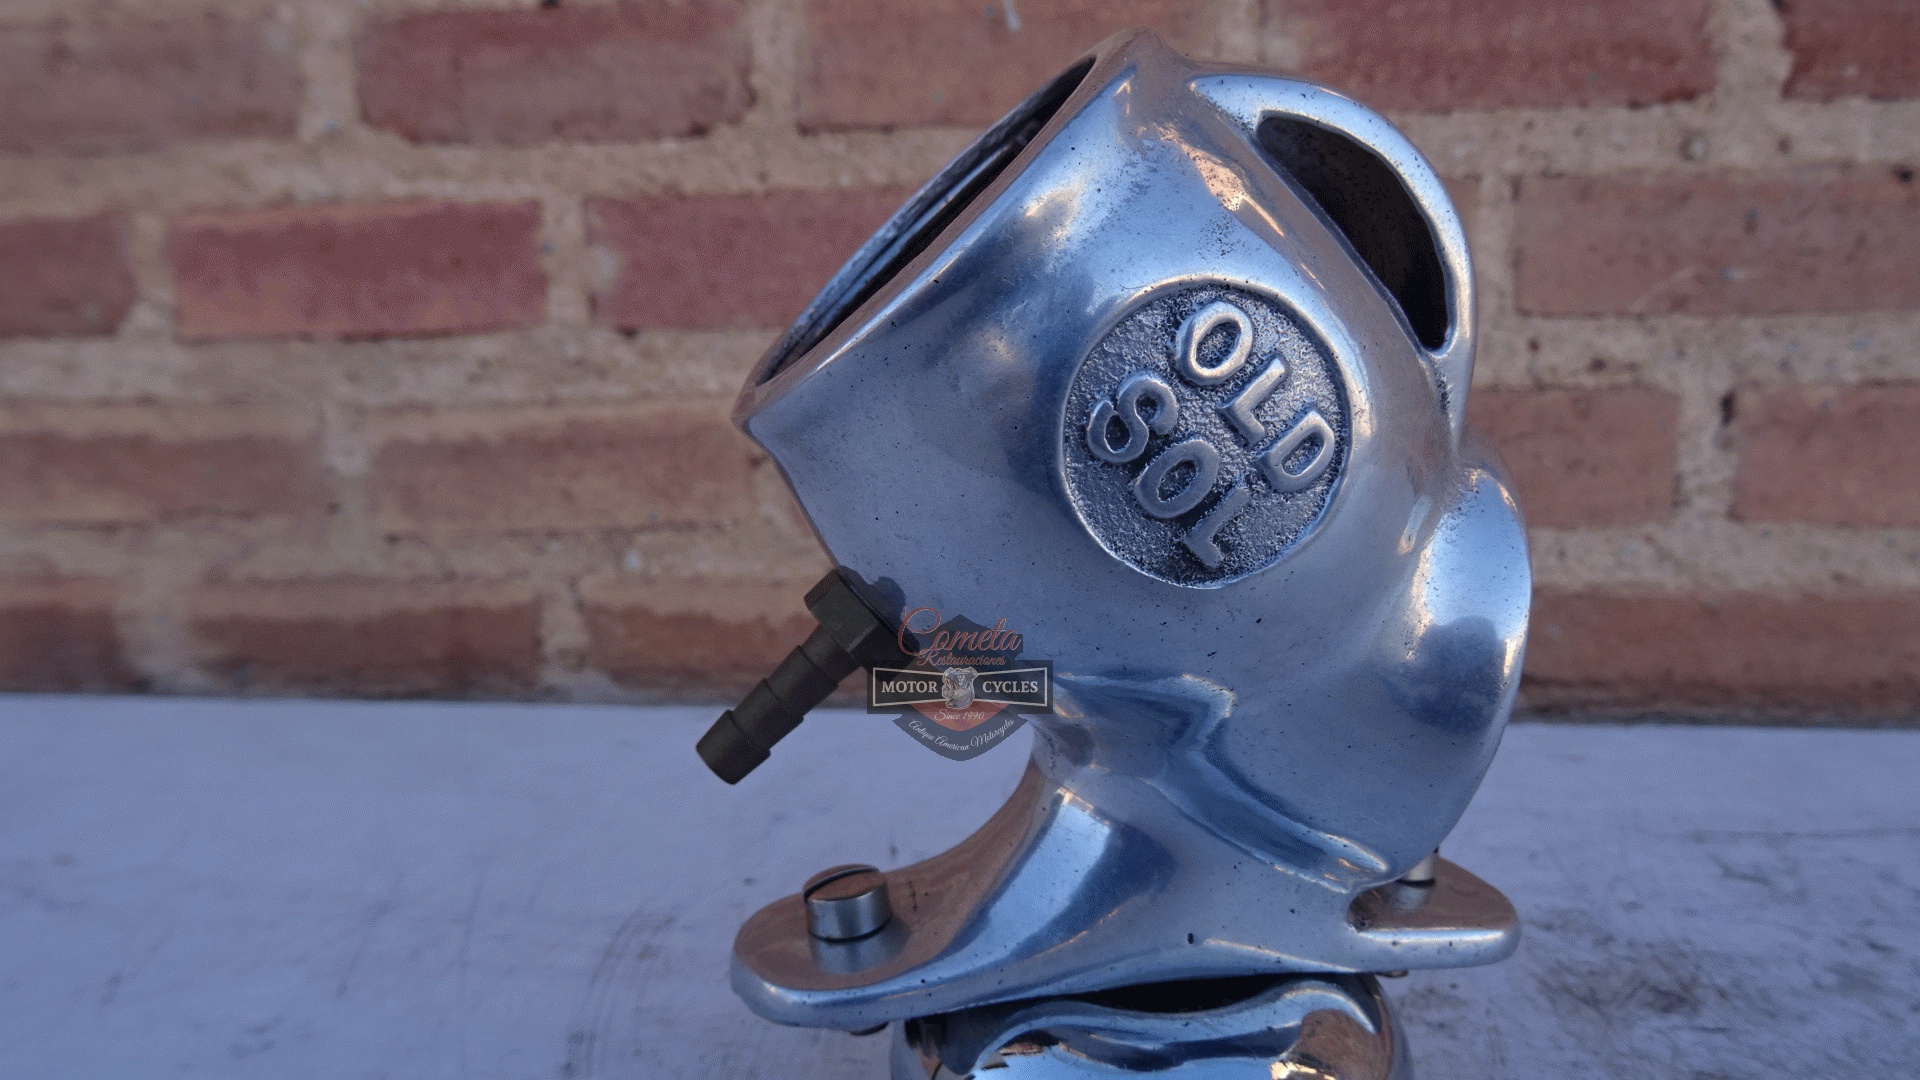 OLD SOL  PILOTO CARBURO / ACETILENO  ORIGINAL NEW OLD STOCK   HARLEY DAVIDSON / INDIAN /  HENDERSON  / EXCELSIOR  / POPE  /  YALE / THOR / READING STANDARD AÑOS 1920 A 1930 !